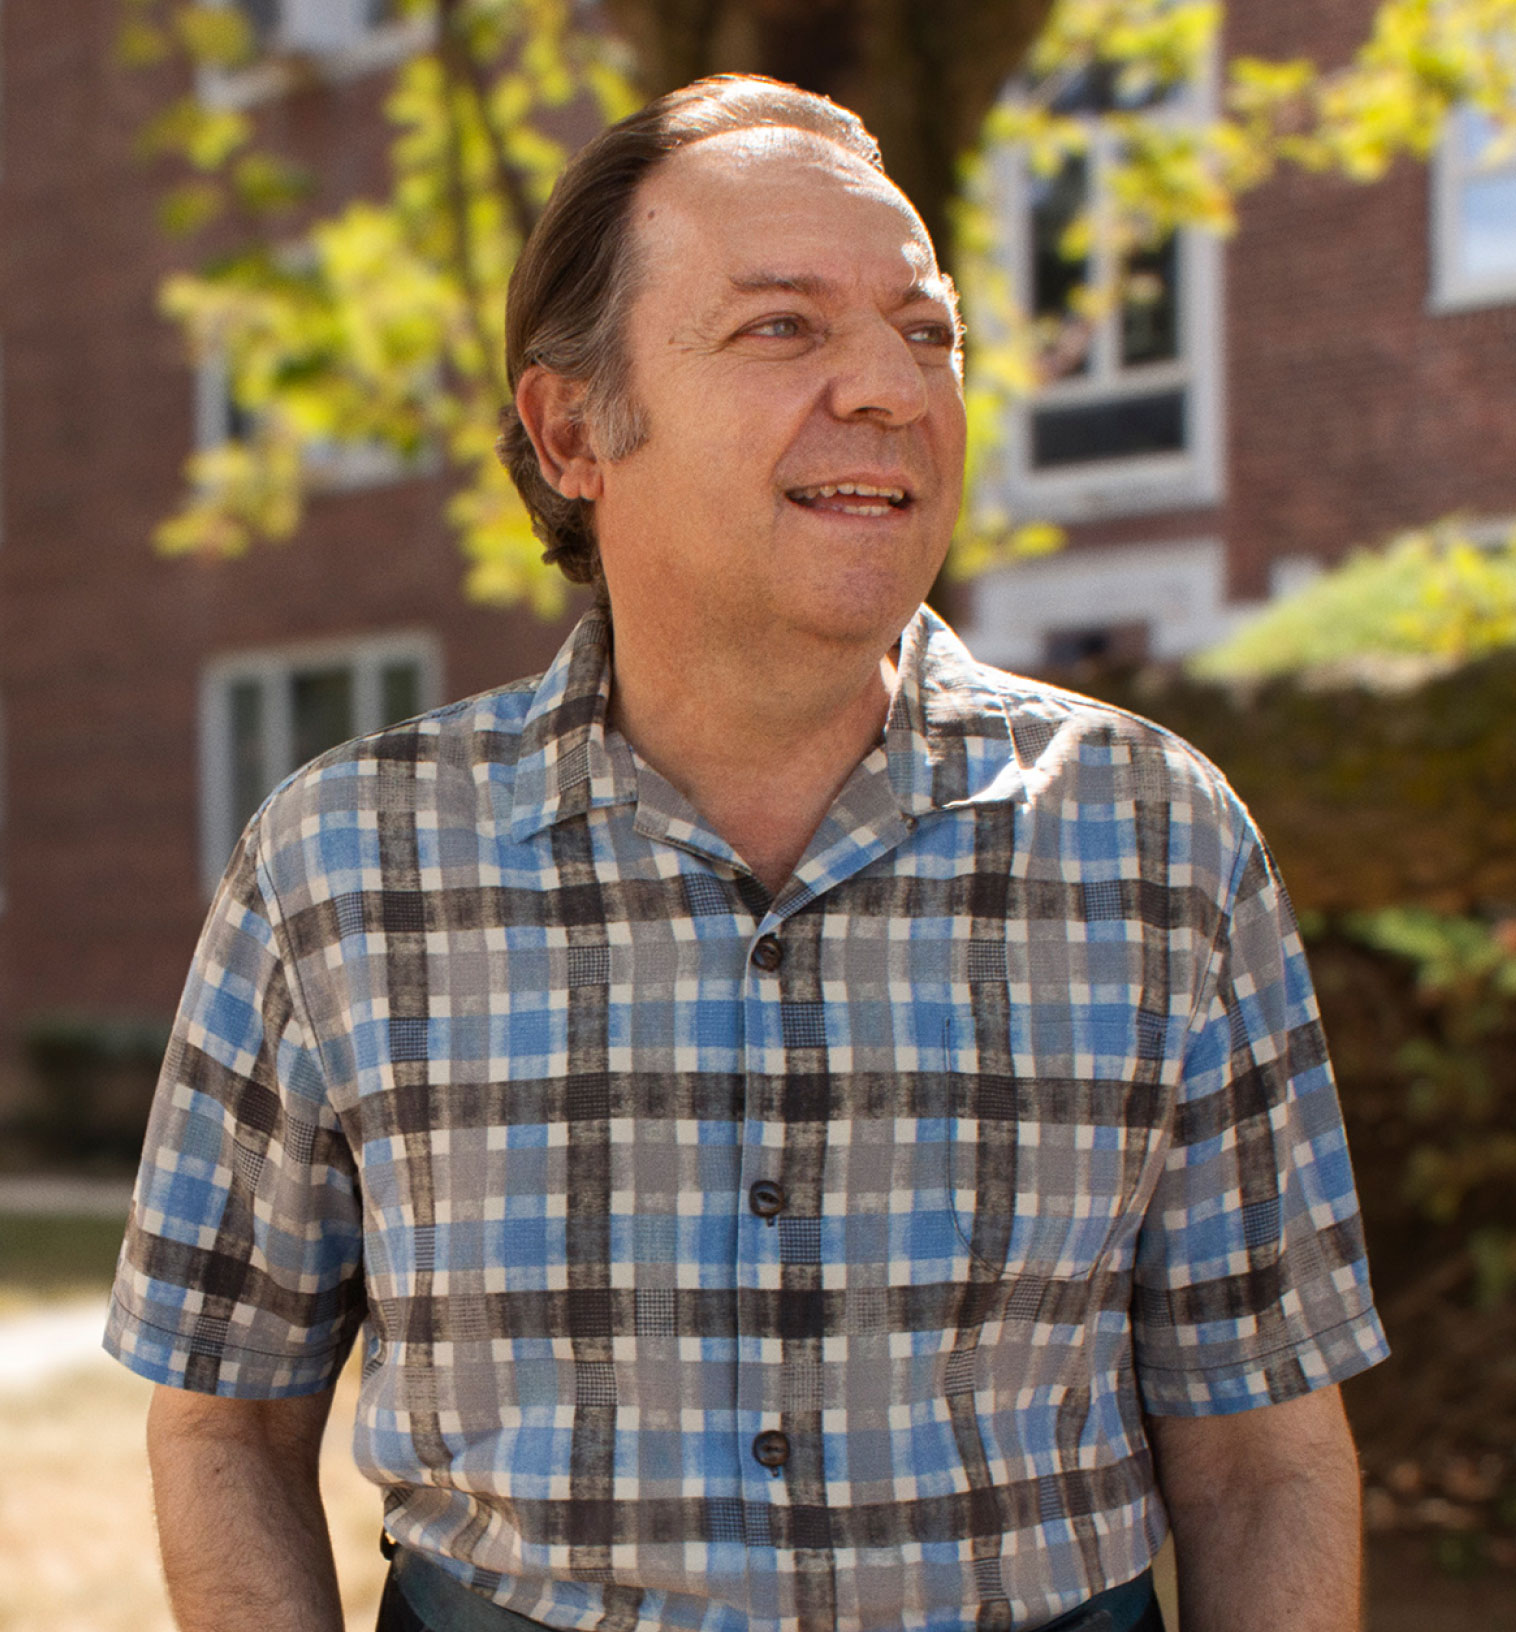 Image of a man wearing a plaid shirt and confidently looking off into the distance.